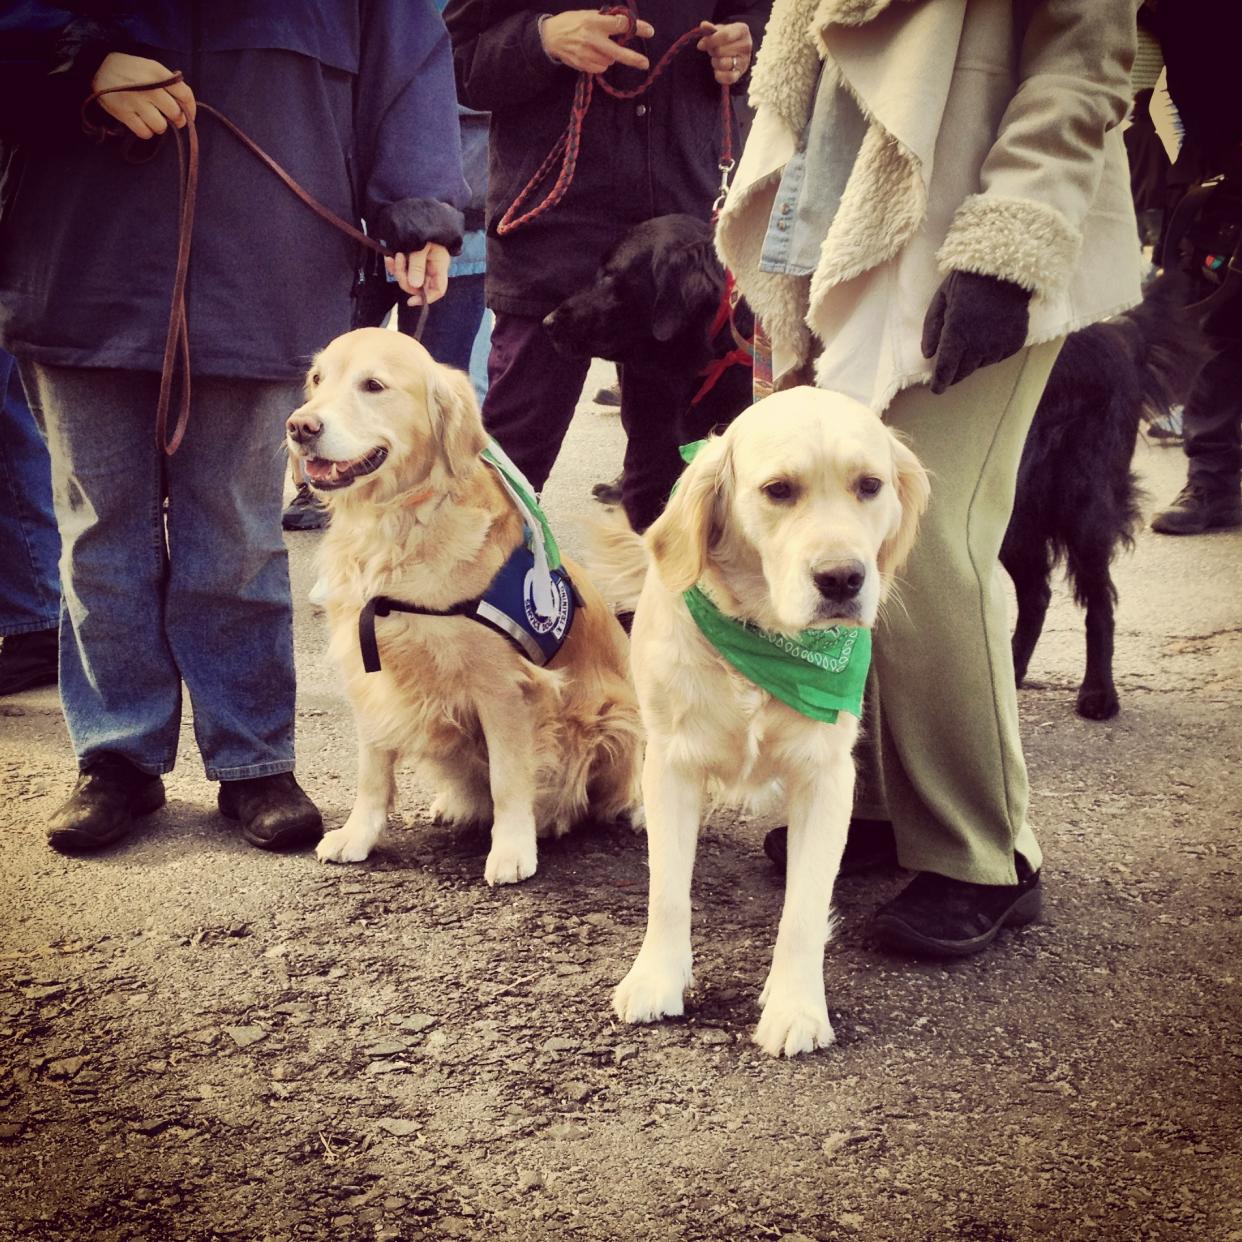 A pair of golden retrievers, both trained therapy dogs, are seen in Newtown, Conn.